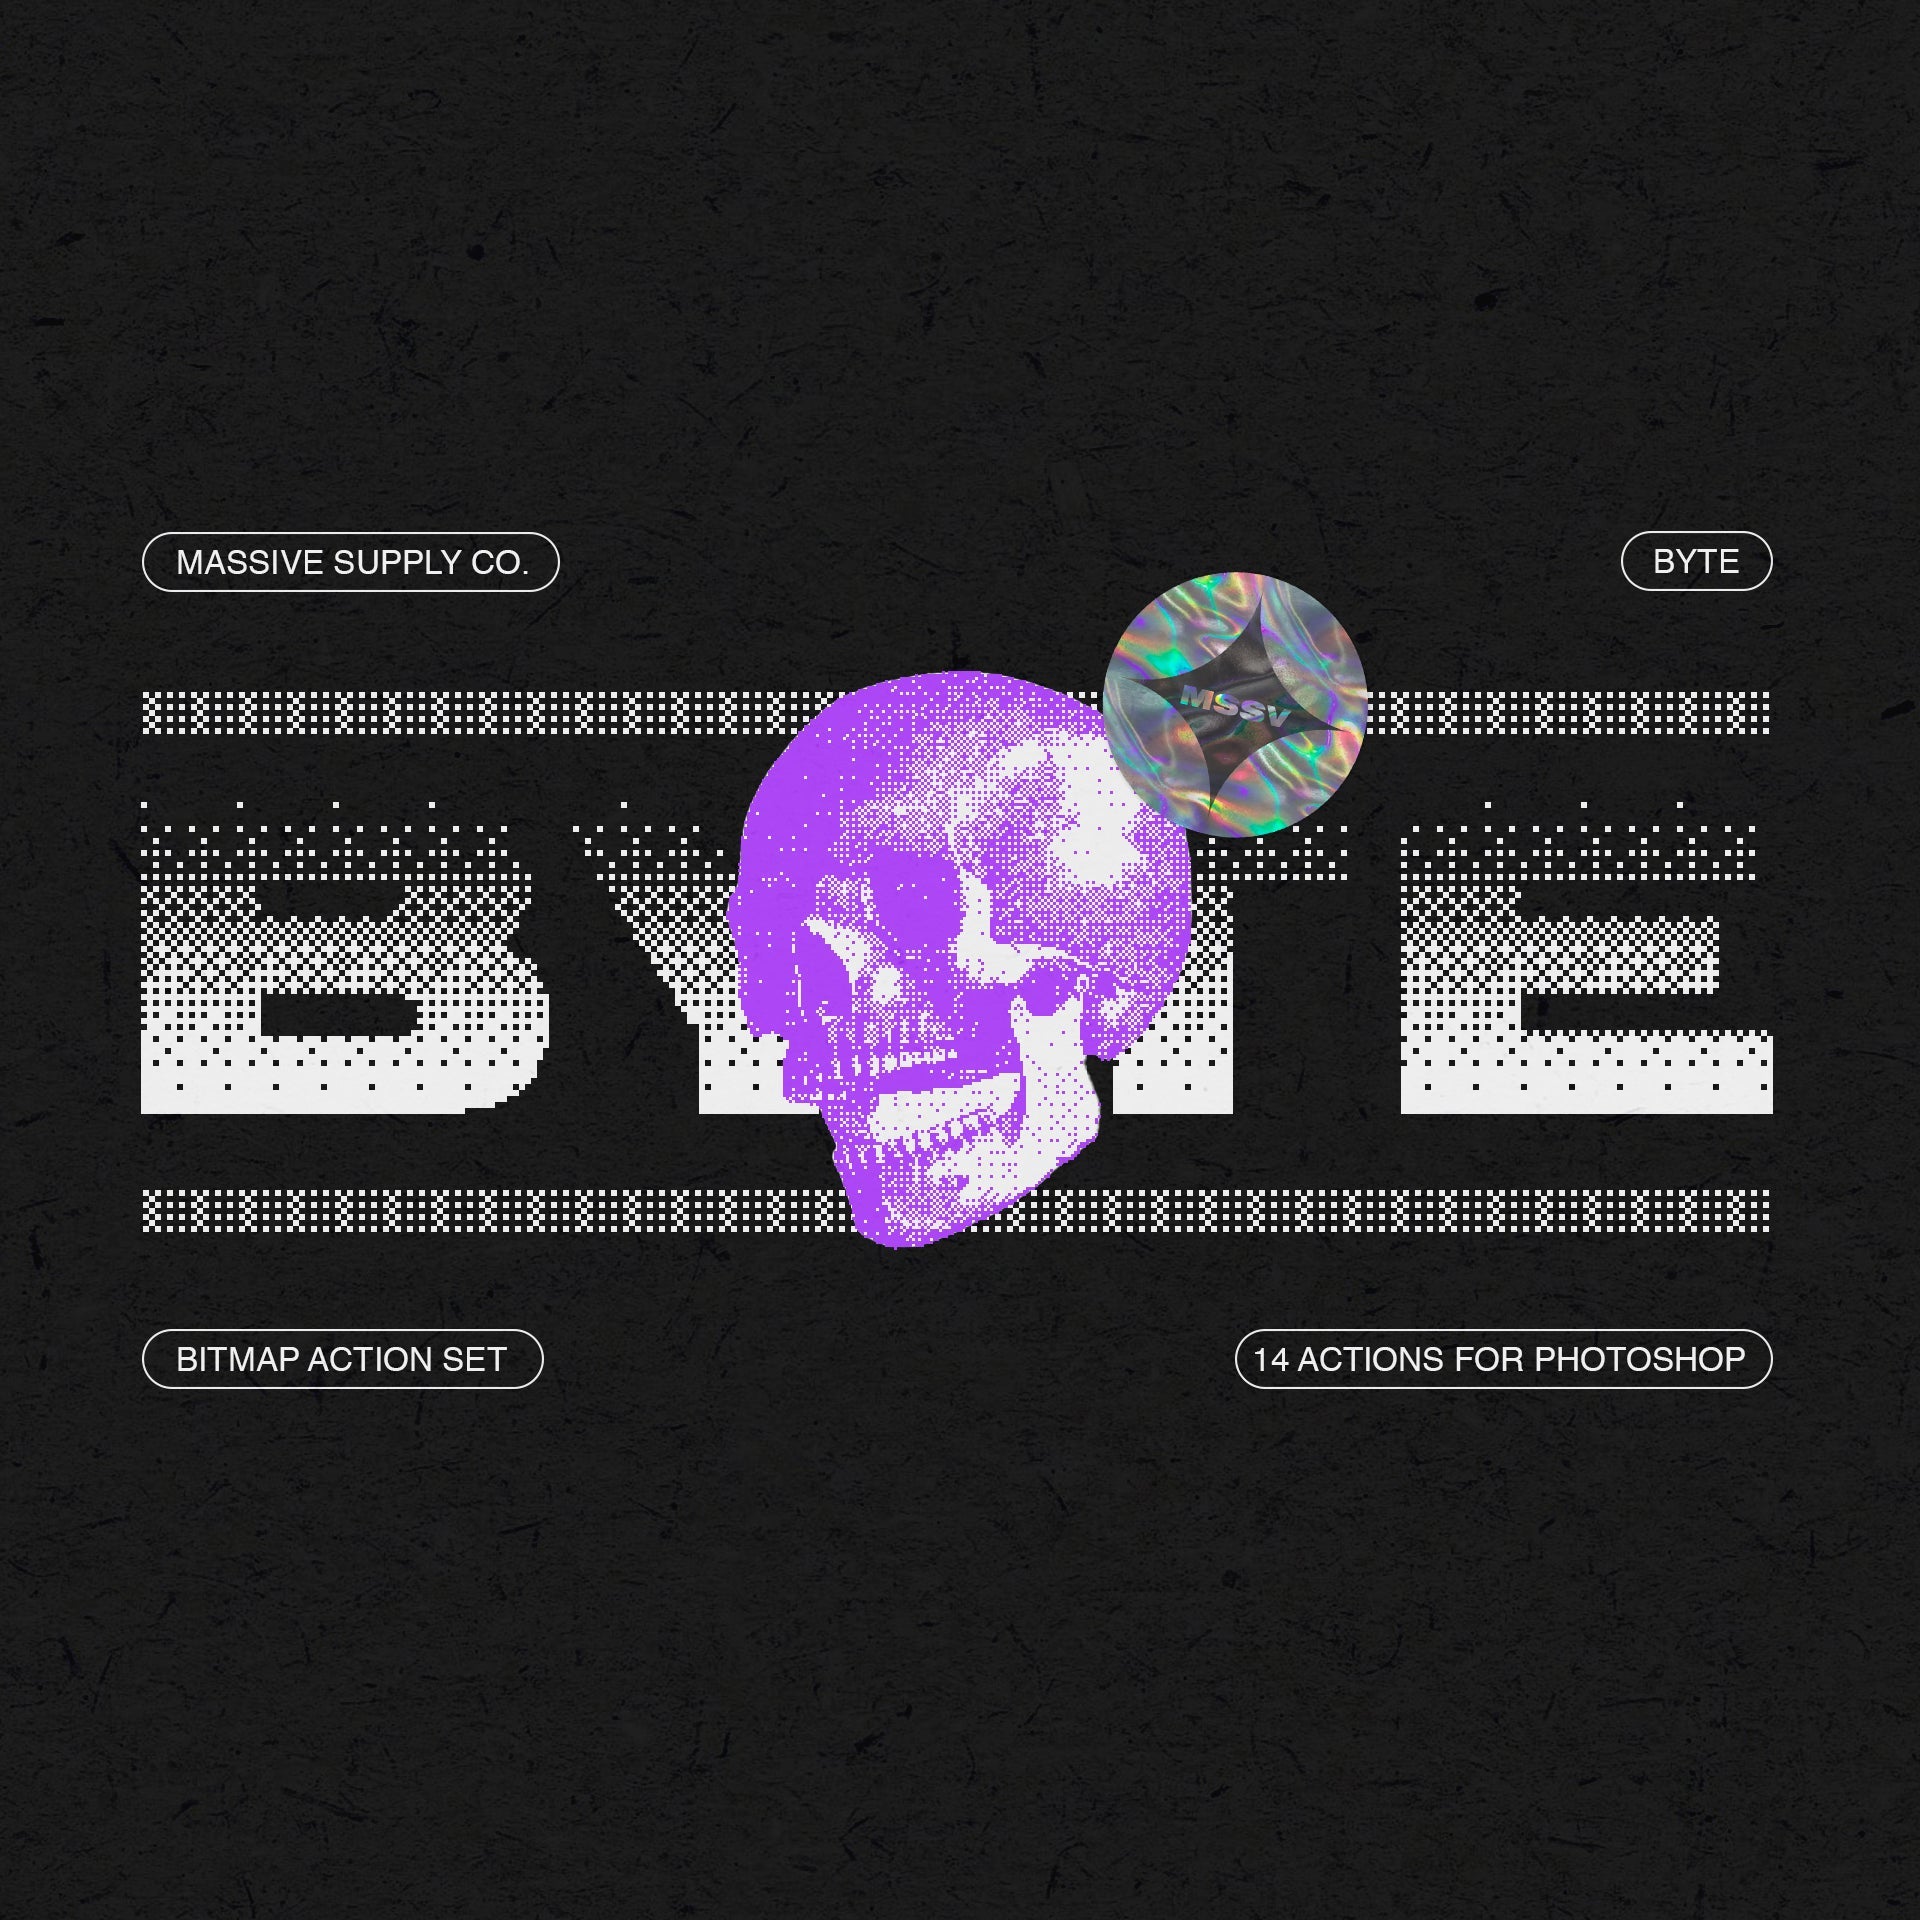 BYTE - Bitmap Actions for Photoshop